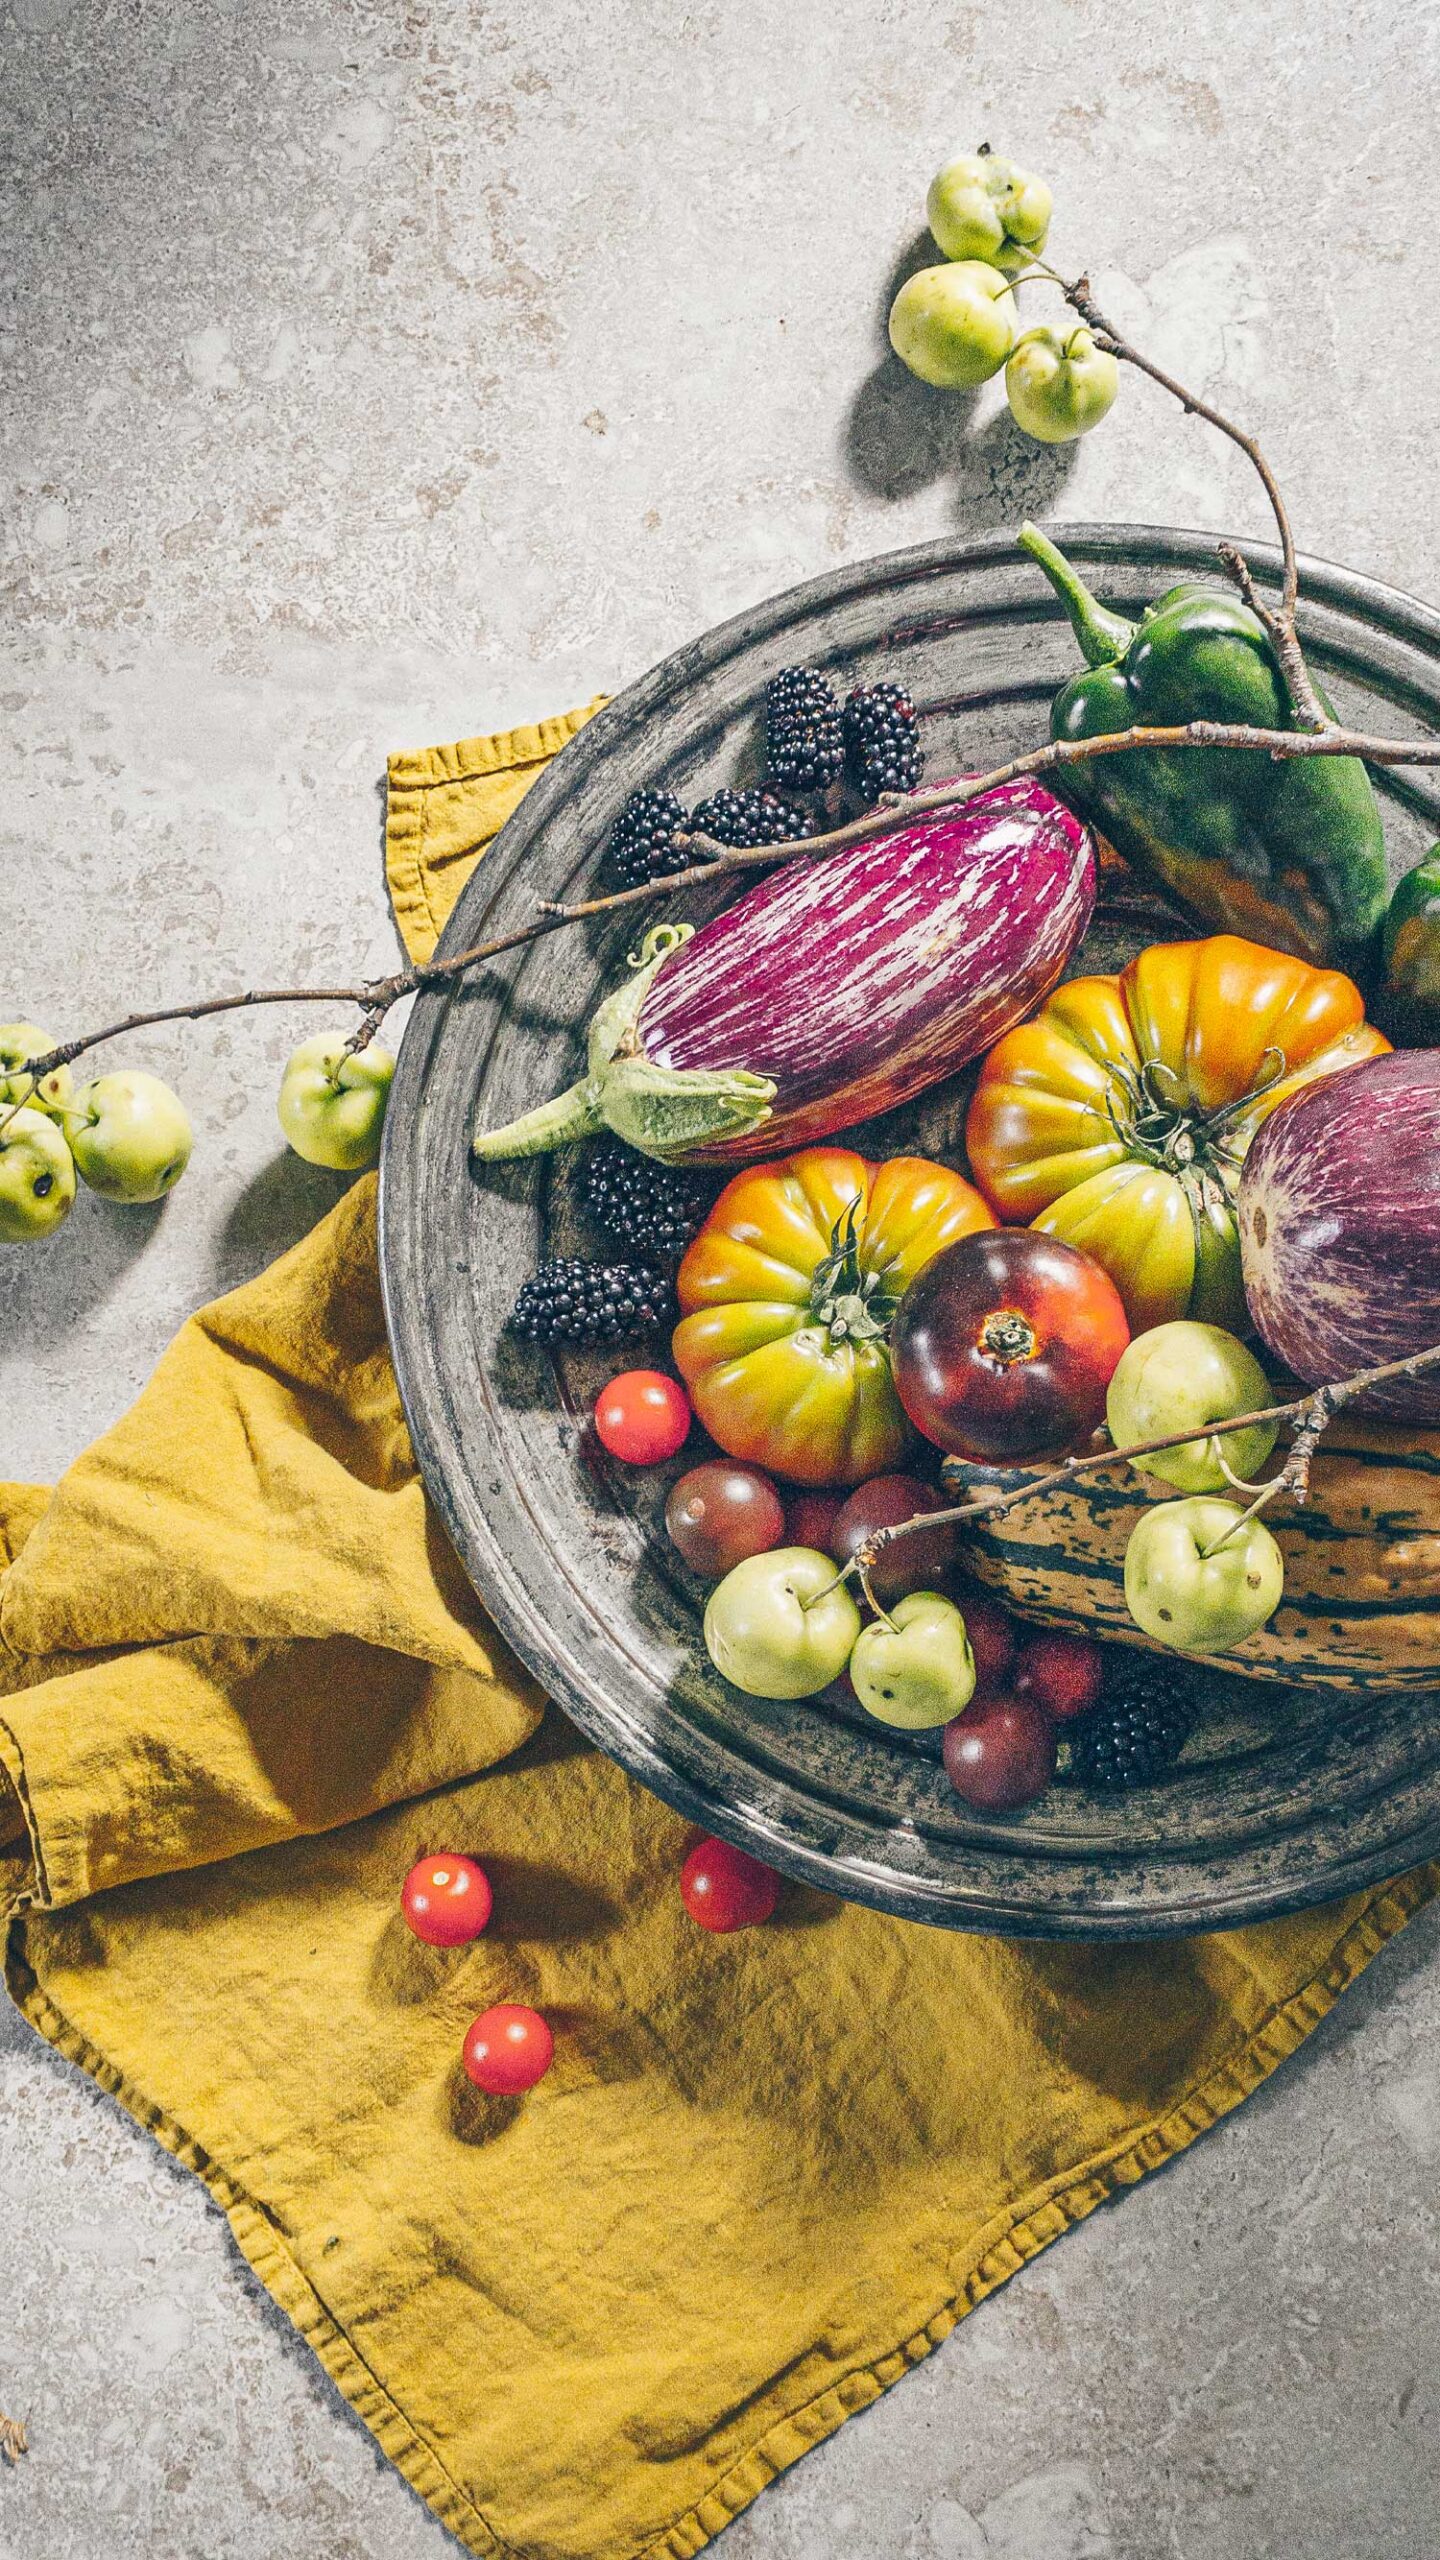 A pewter plate with tomatoes, eggplant, blackberries, wild apples, peppers, and delicata squash, accented by a mustard colored napkin.